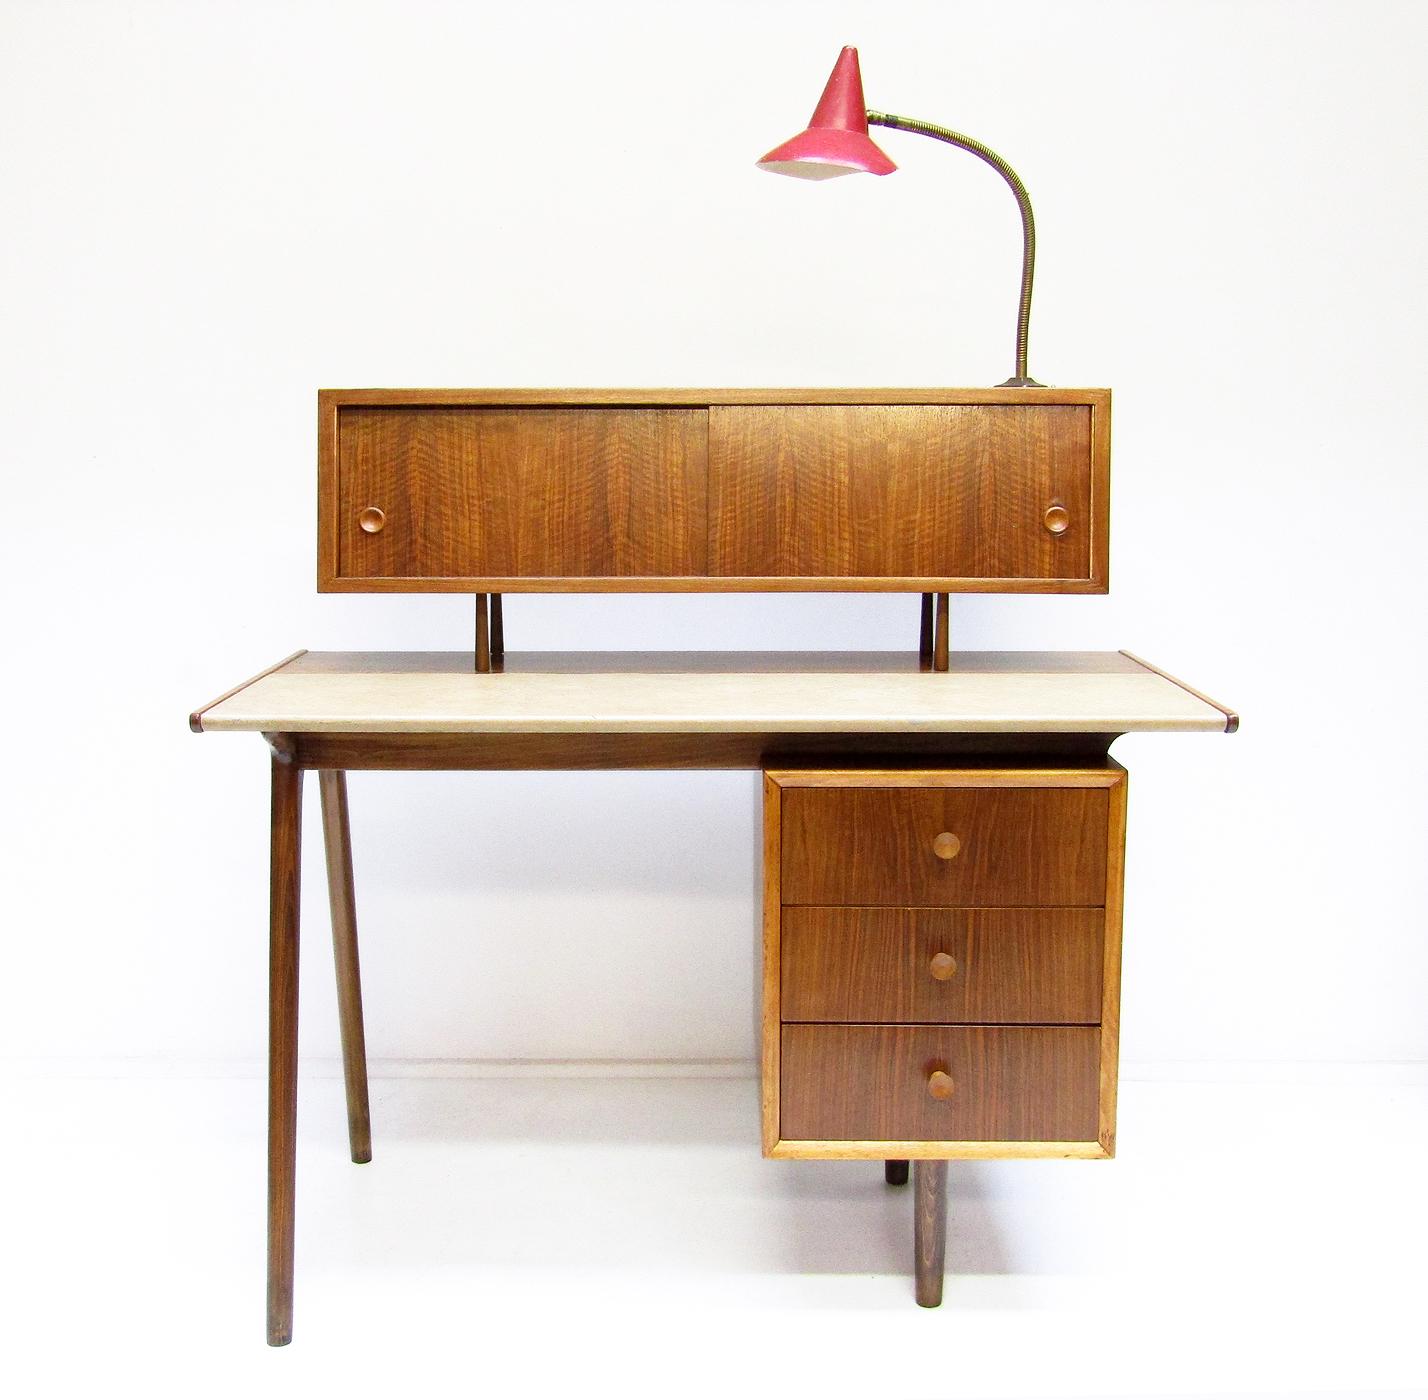 A 1950s atomic desk in walnut and beechwood, attributed to Christopher Heal for Heal & Son.

The combination of floating cabinet, gooseneck lamp, splayed legs and bold walnut figuring make this one of the most appealing desks we have